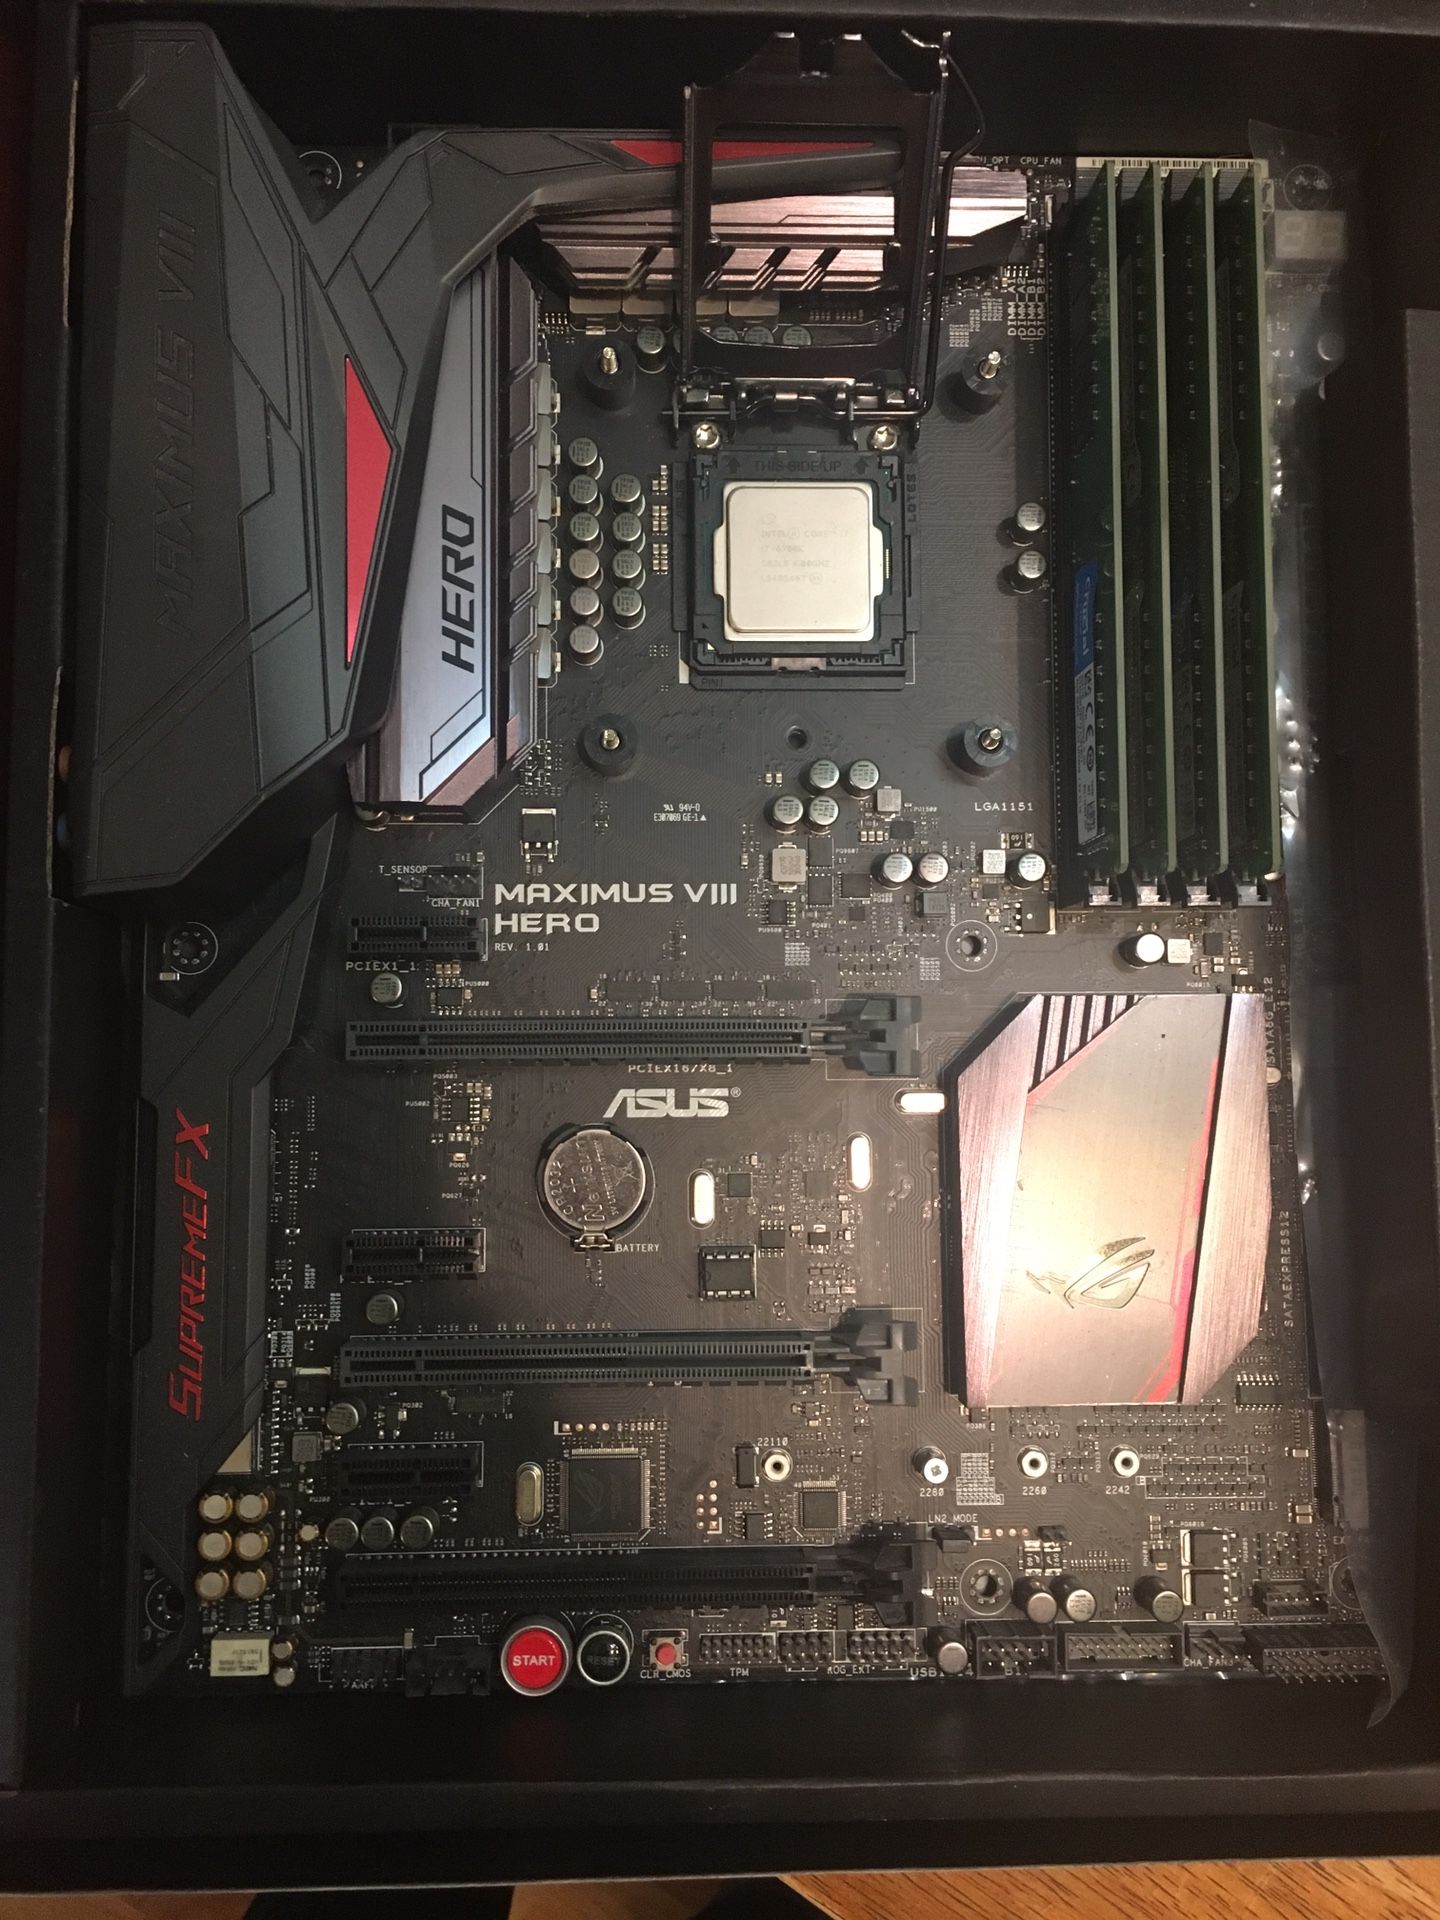 Motherboard, CPU, and RAM